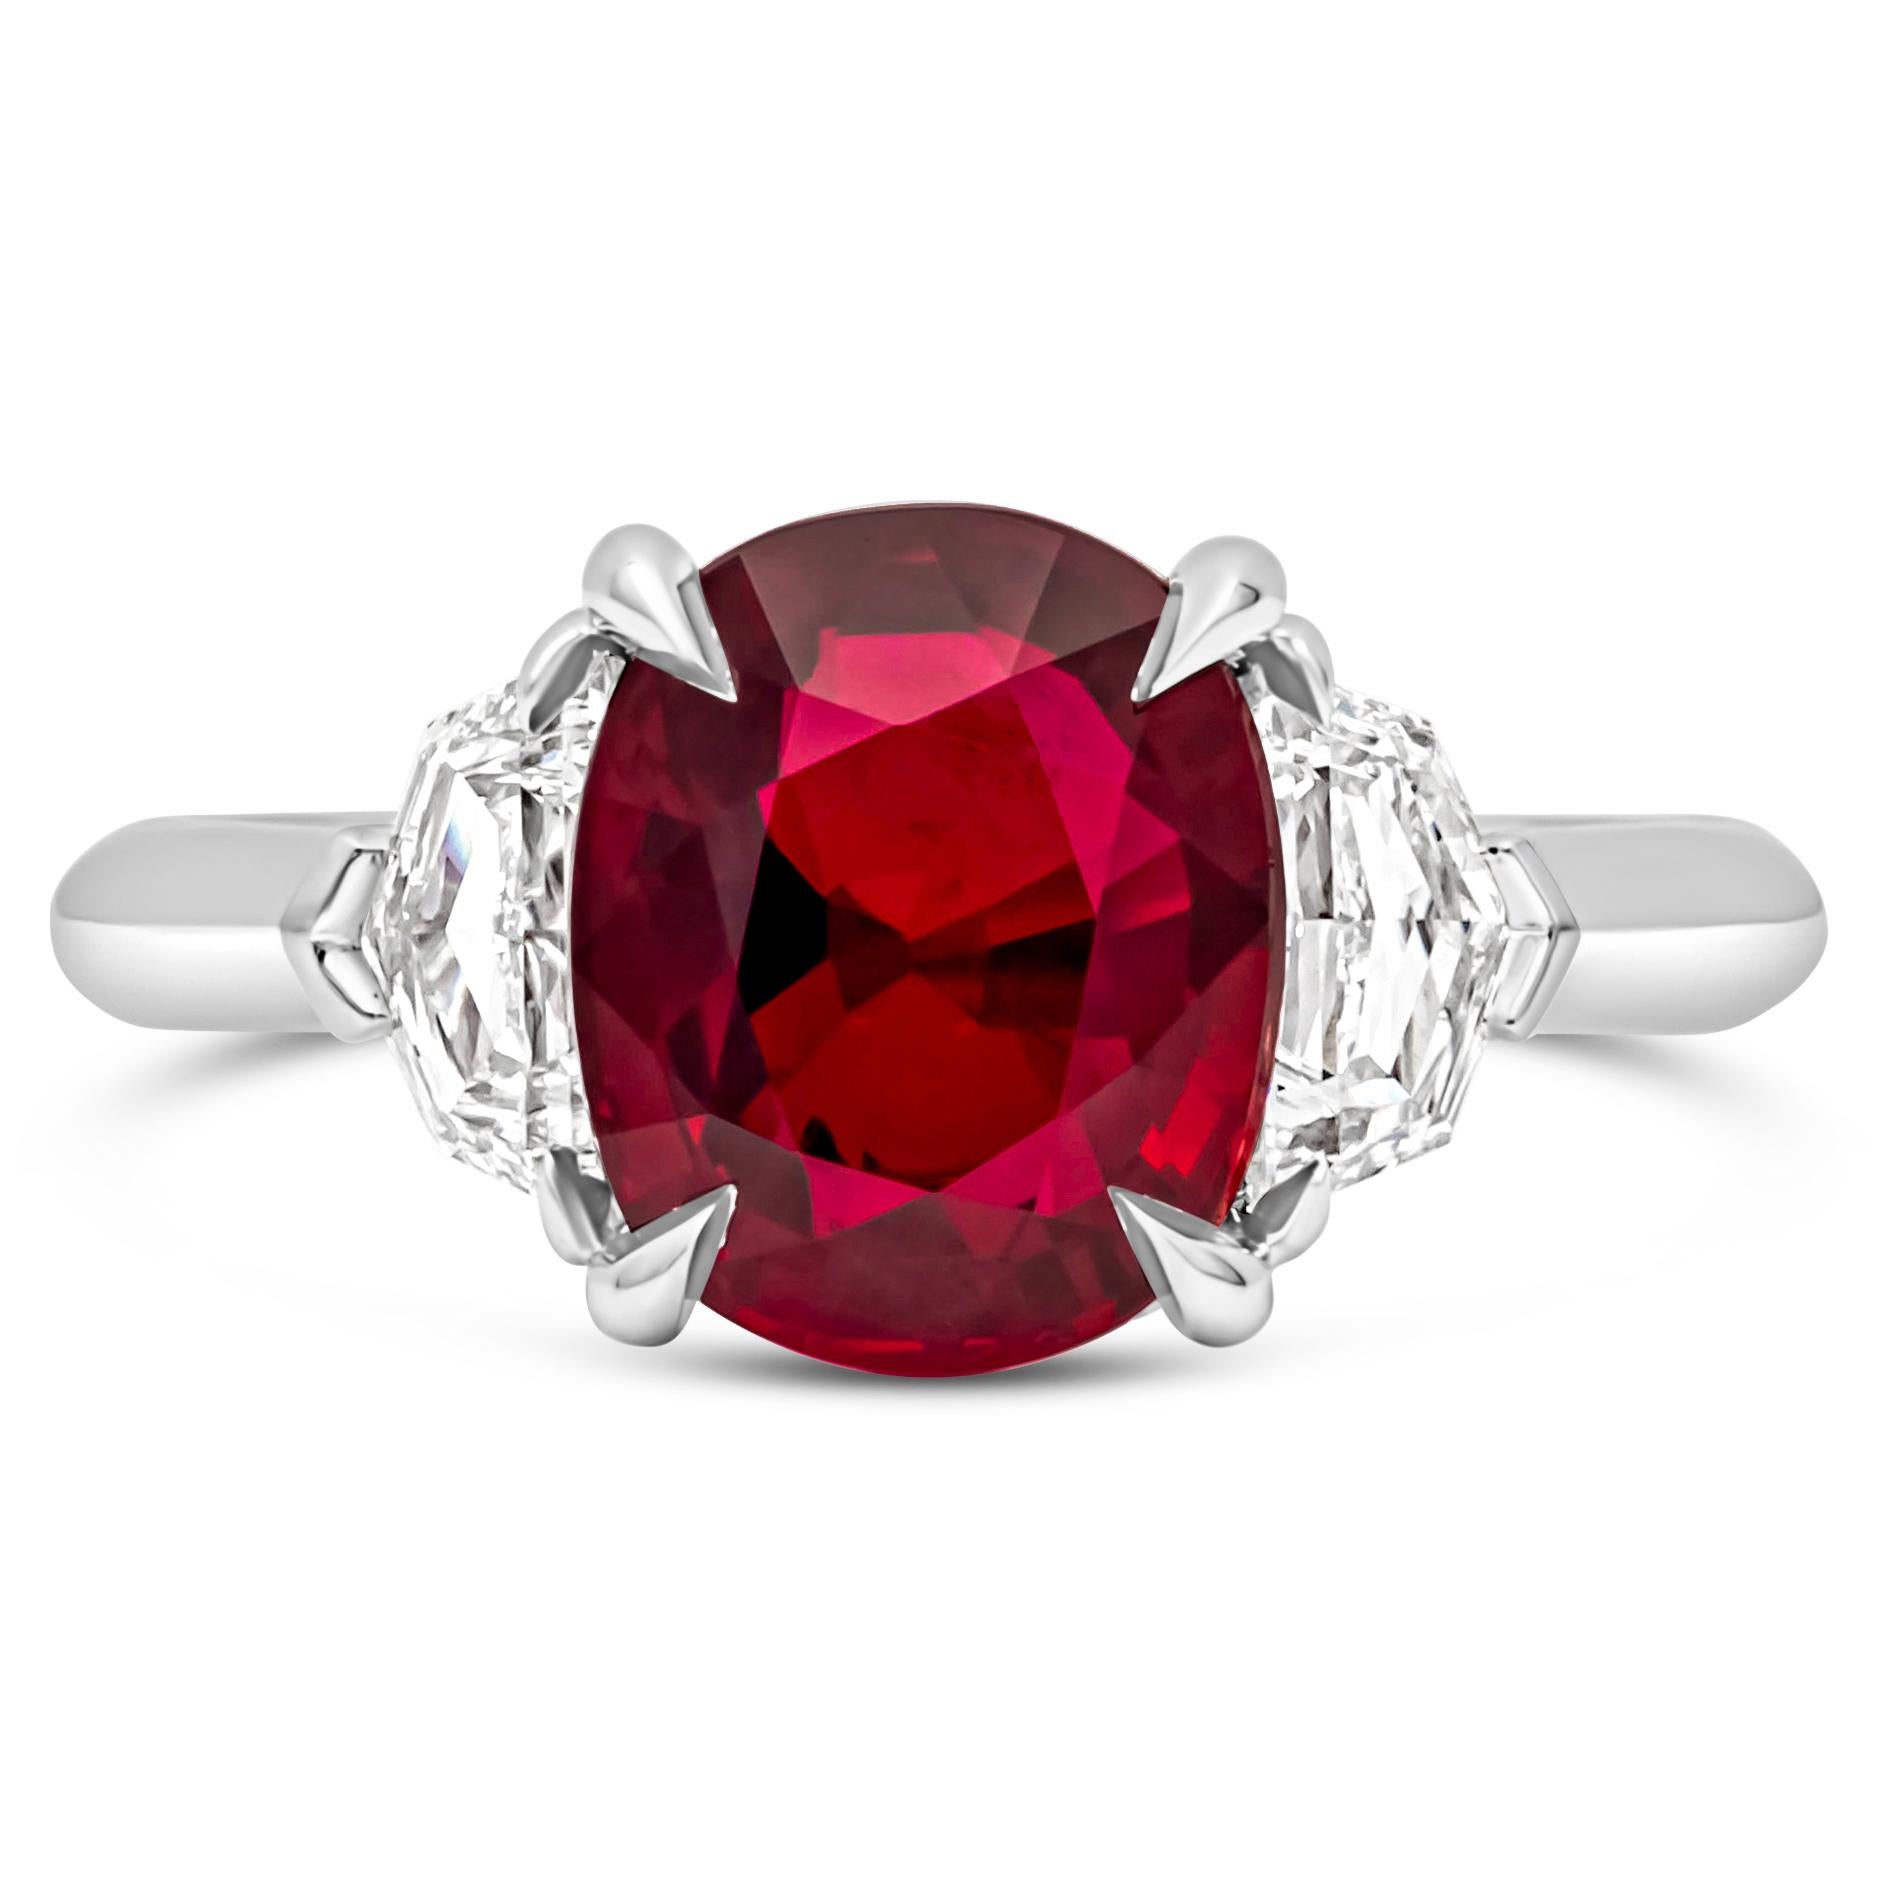 A wonderful and classy three stone engagement ring, showcasing a GIA certified 4.02 carats cushion brilliant cut ruby in the center, set on a four prong basket setting. Flanked by one diamond on each side weighing 0.50 carat total with F color and